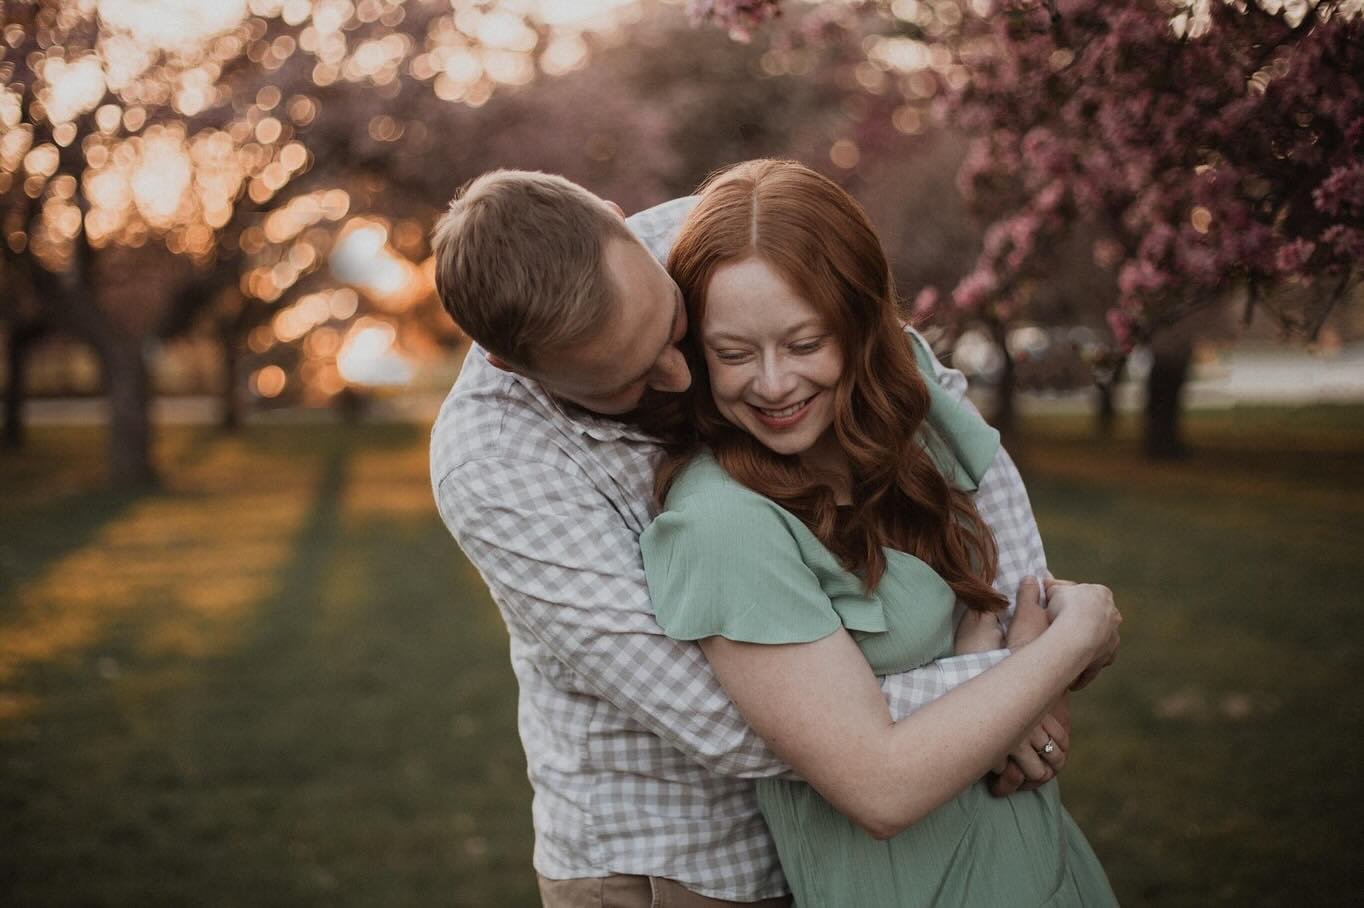 The sweetest couple in the prettiest springtime light ✨ Could the backdrop be any more dreamy?!